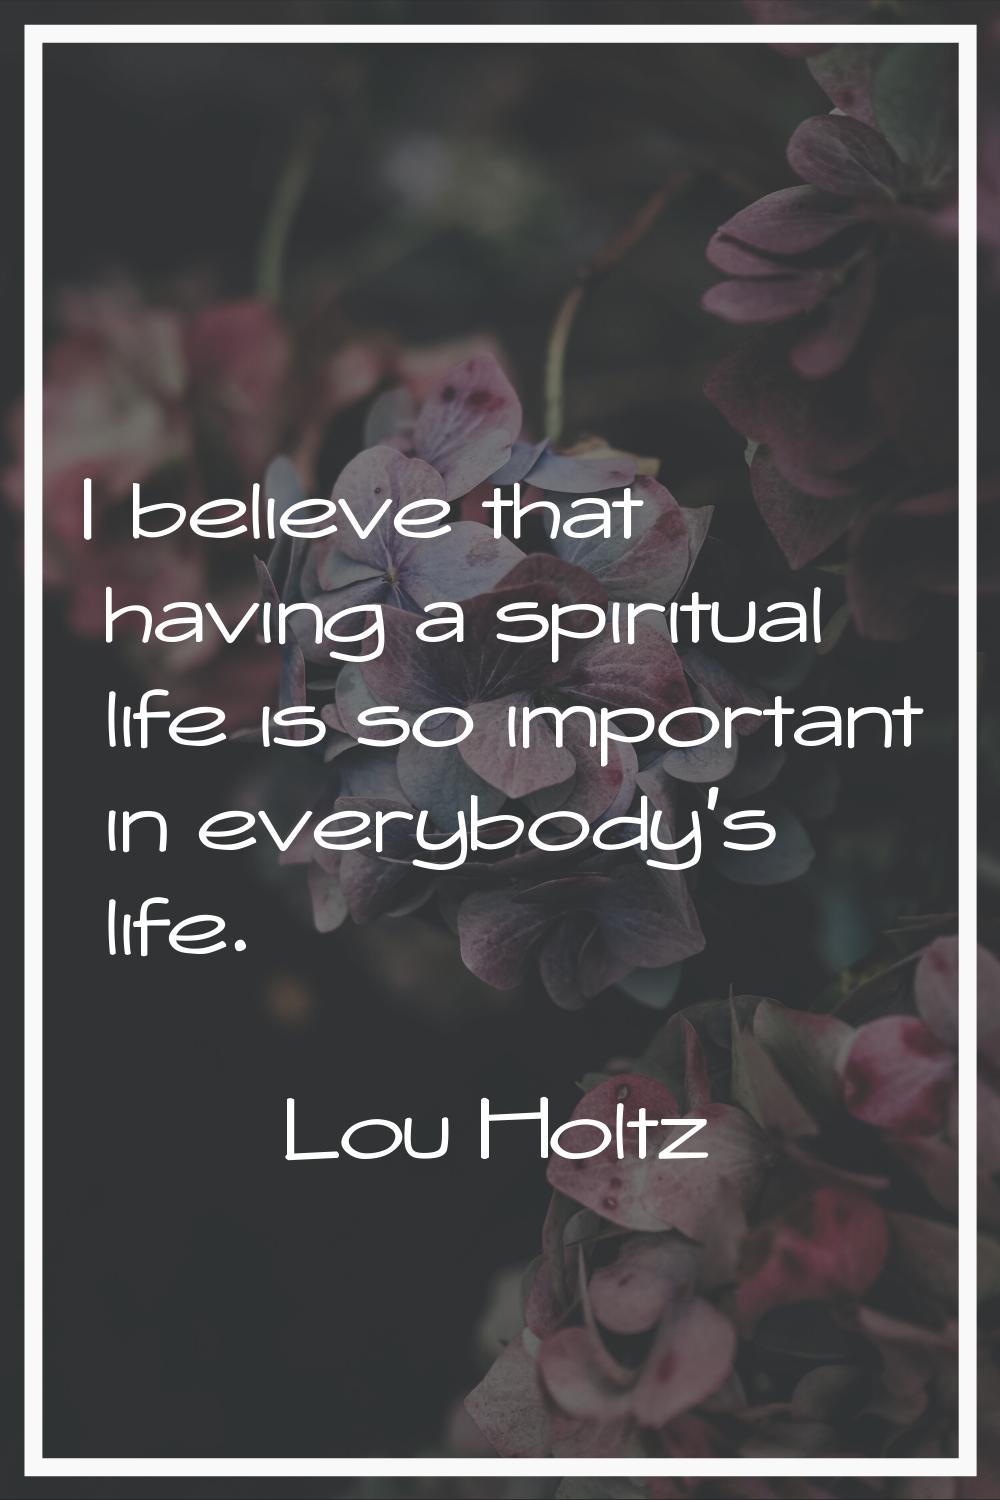 I believe that having a spiritual life is so important in everybody's life.